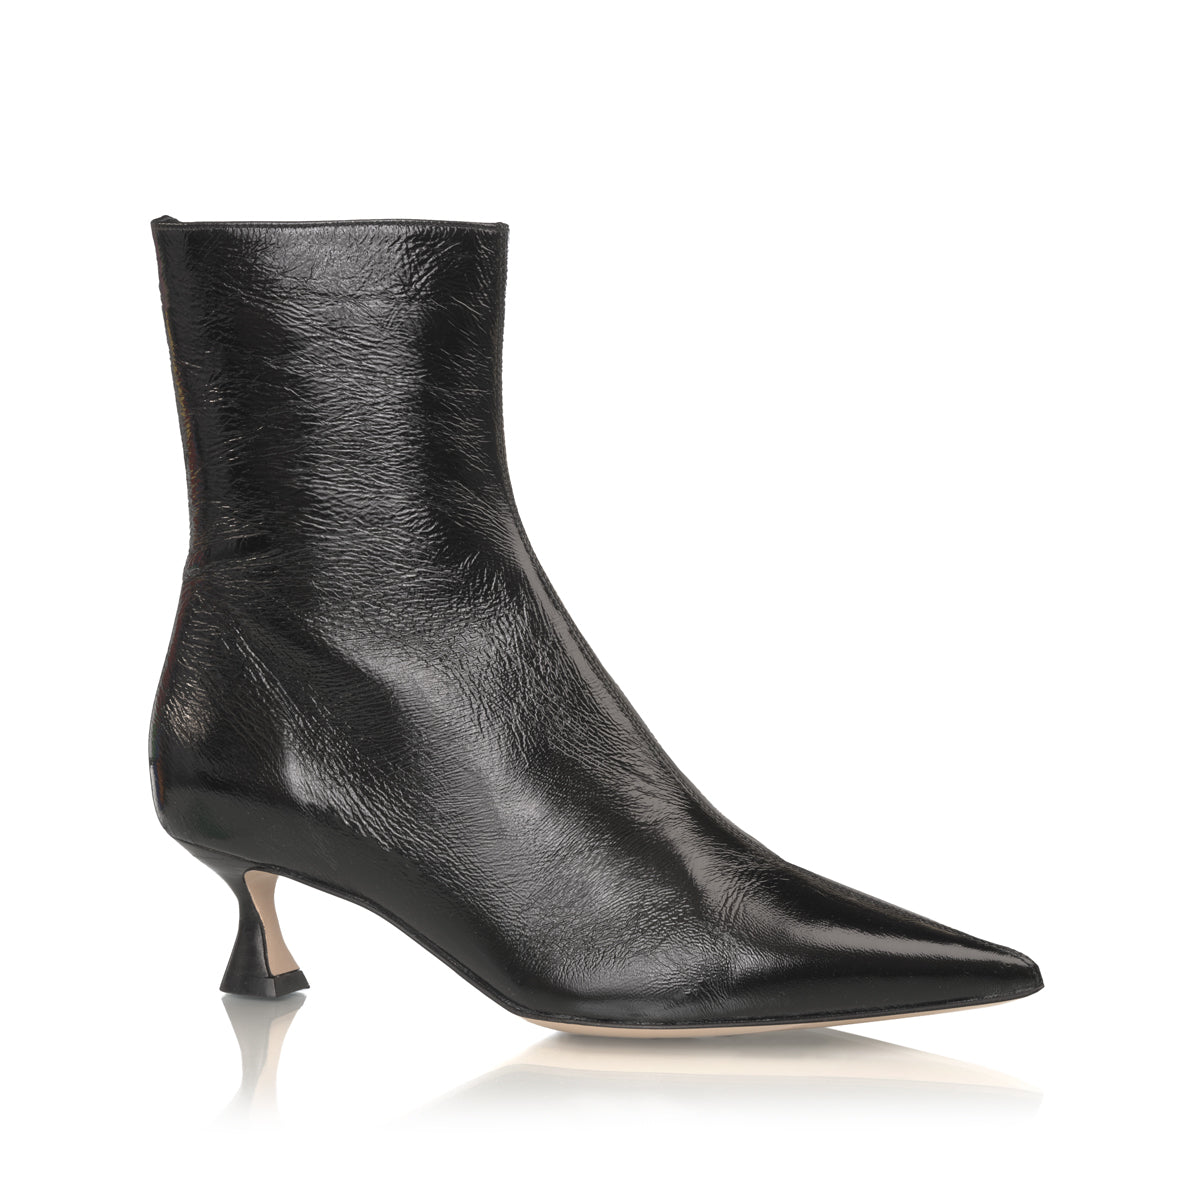 Audra 50 Bootie | Black Crinkled Patent